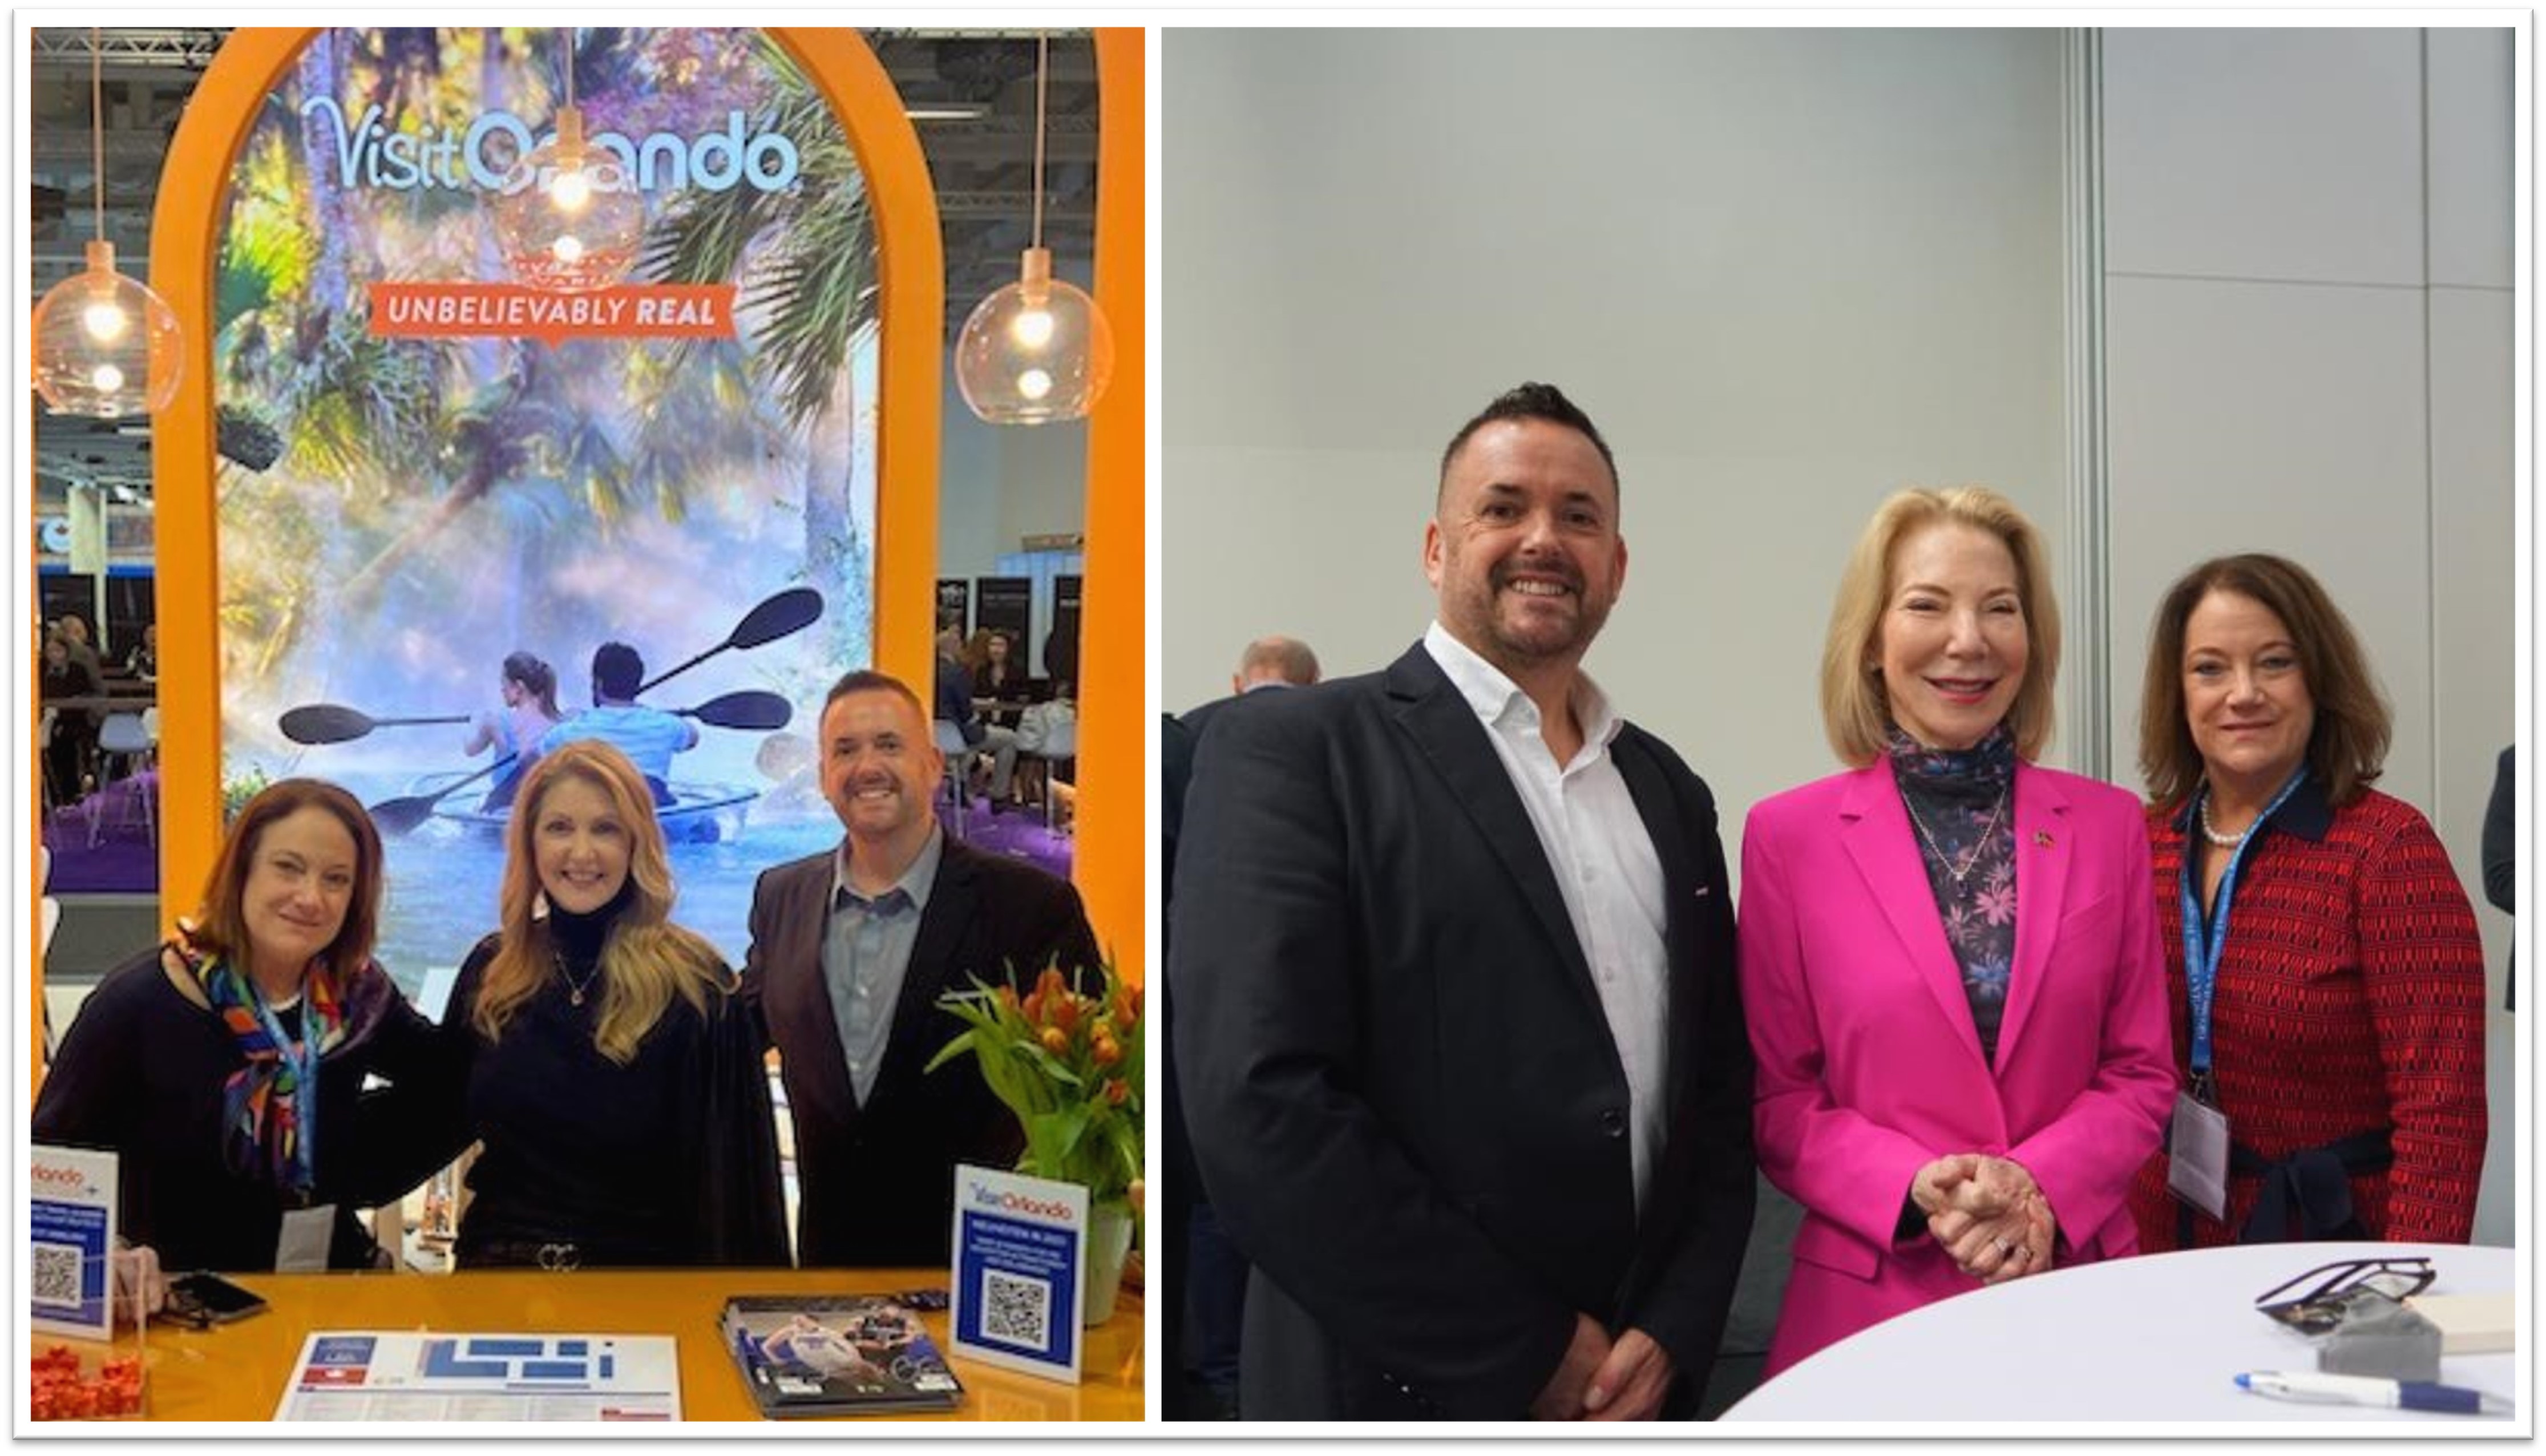 Pictured from left to right: Visit Orlando's VP of travel industry sales, Elaine Blazys; Visit Orlando board member and founder of onePULSE Foundation, Barbara Poma; Visit Orlando's travel industry sales director, Phil White; and United States Ambassador to Germany, Dr. Amy Gutmann, at ITB Berlin.  